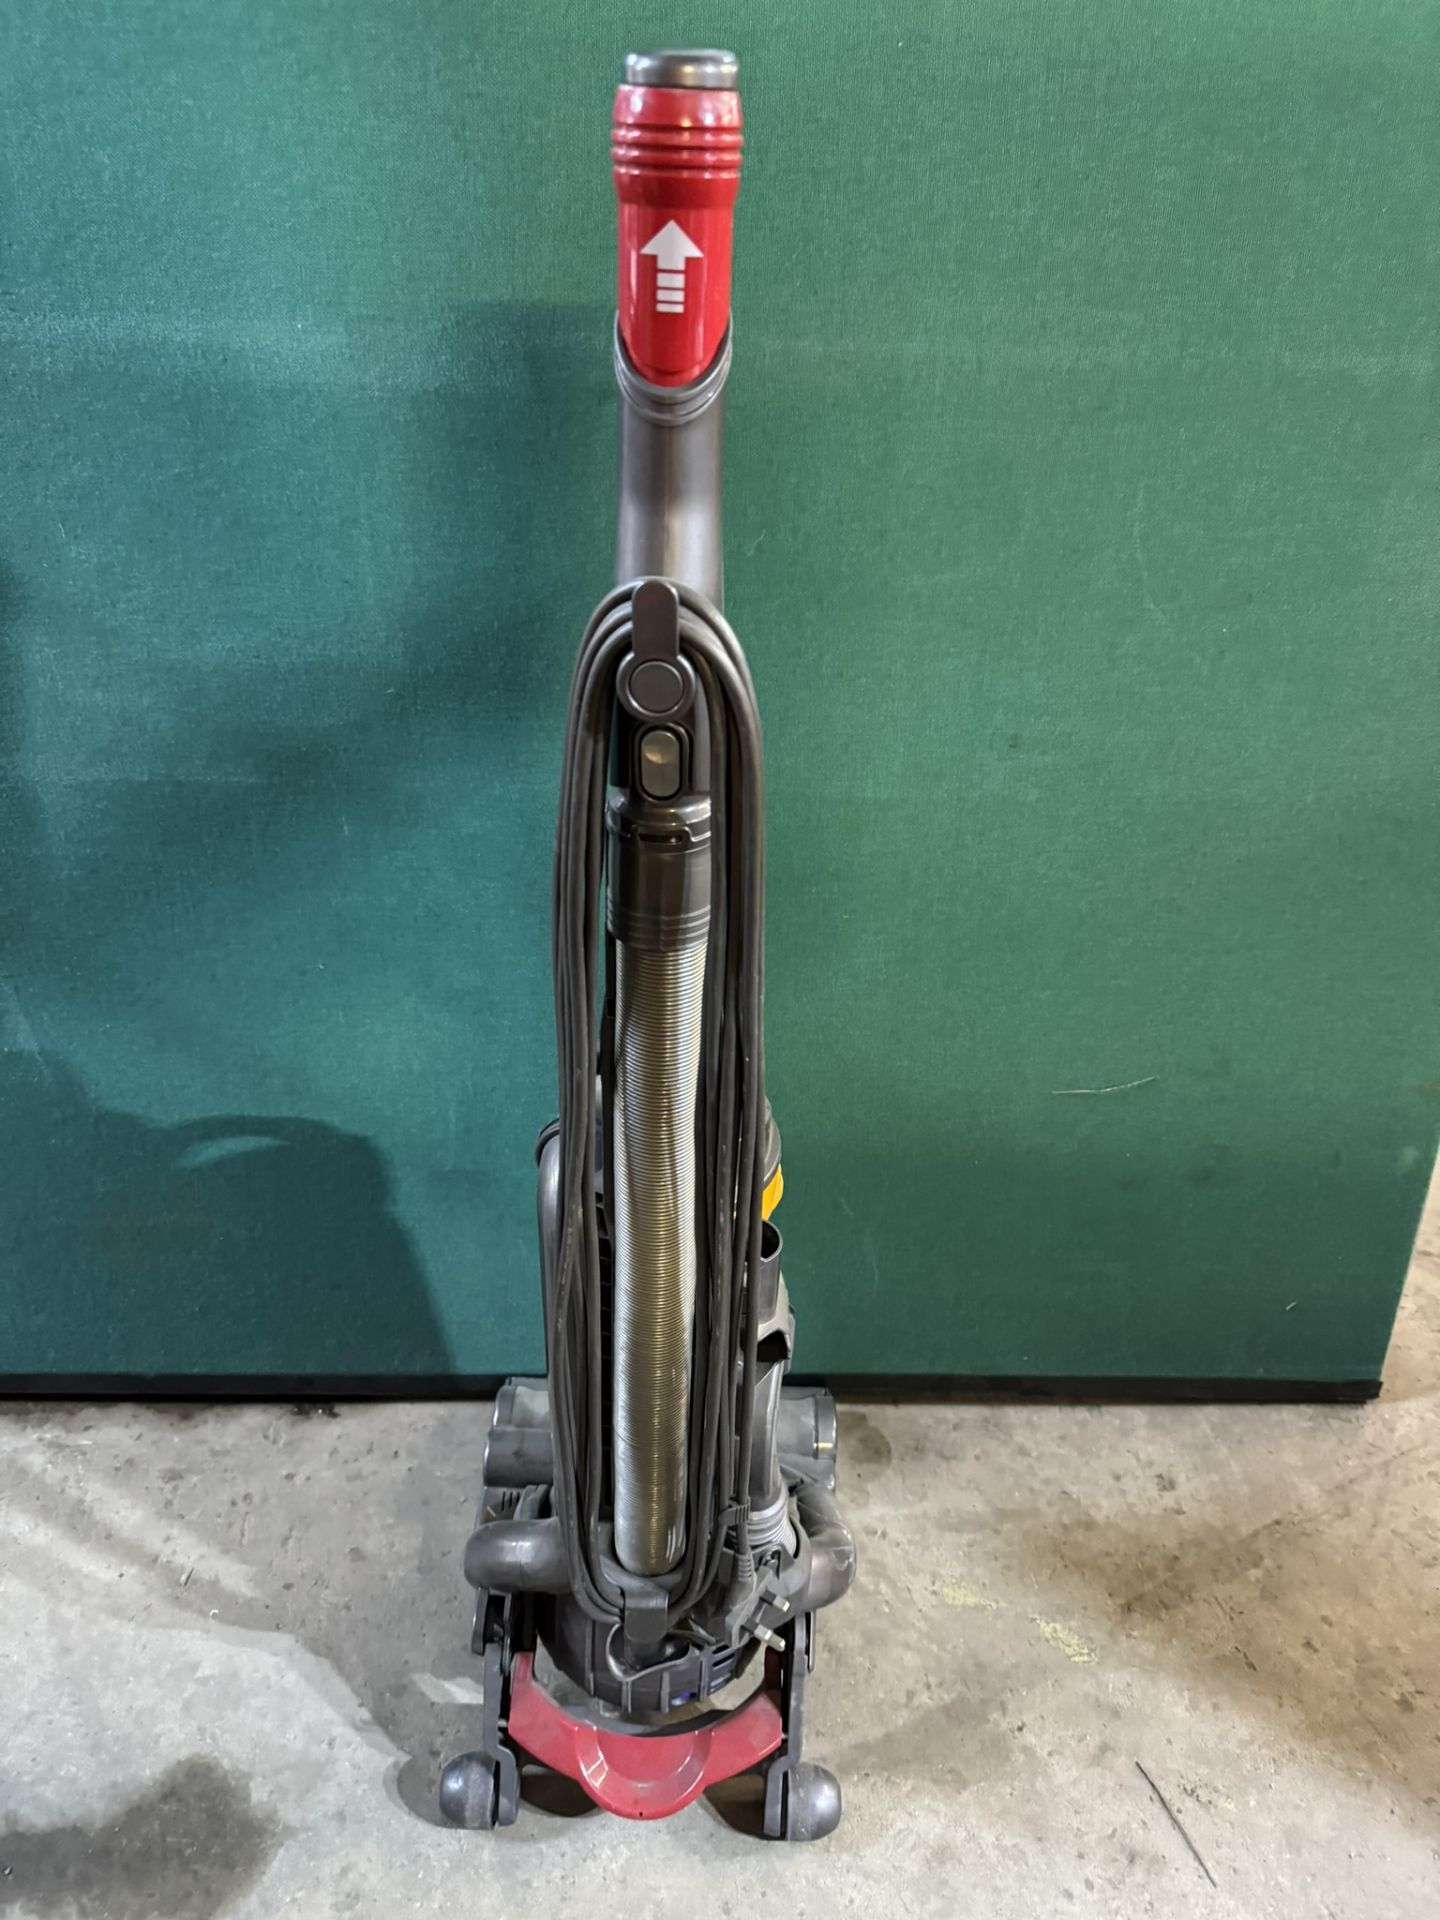 Dyson DC25 Ball All-Floors Upright Vacuum Cleaner - Image 4 of 5